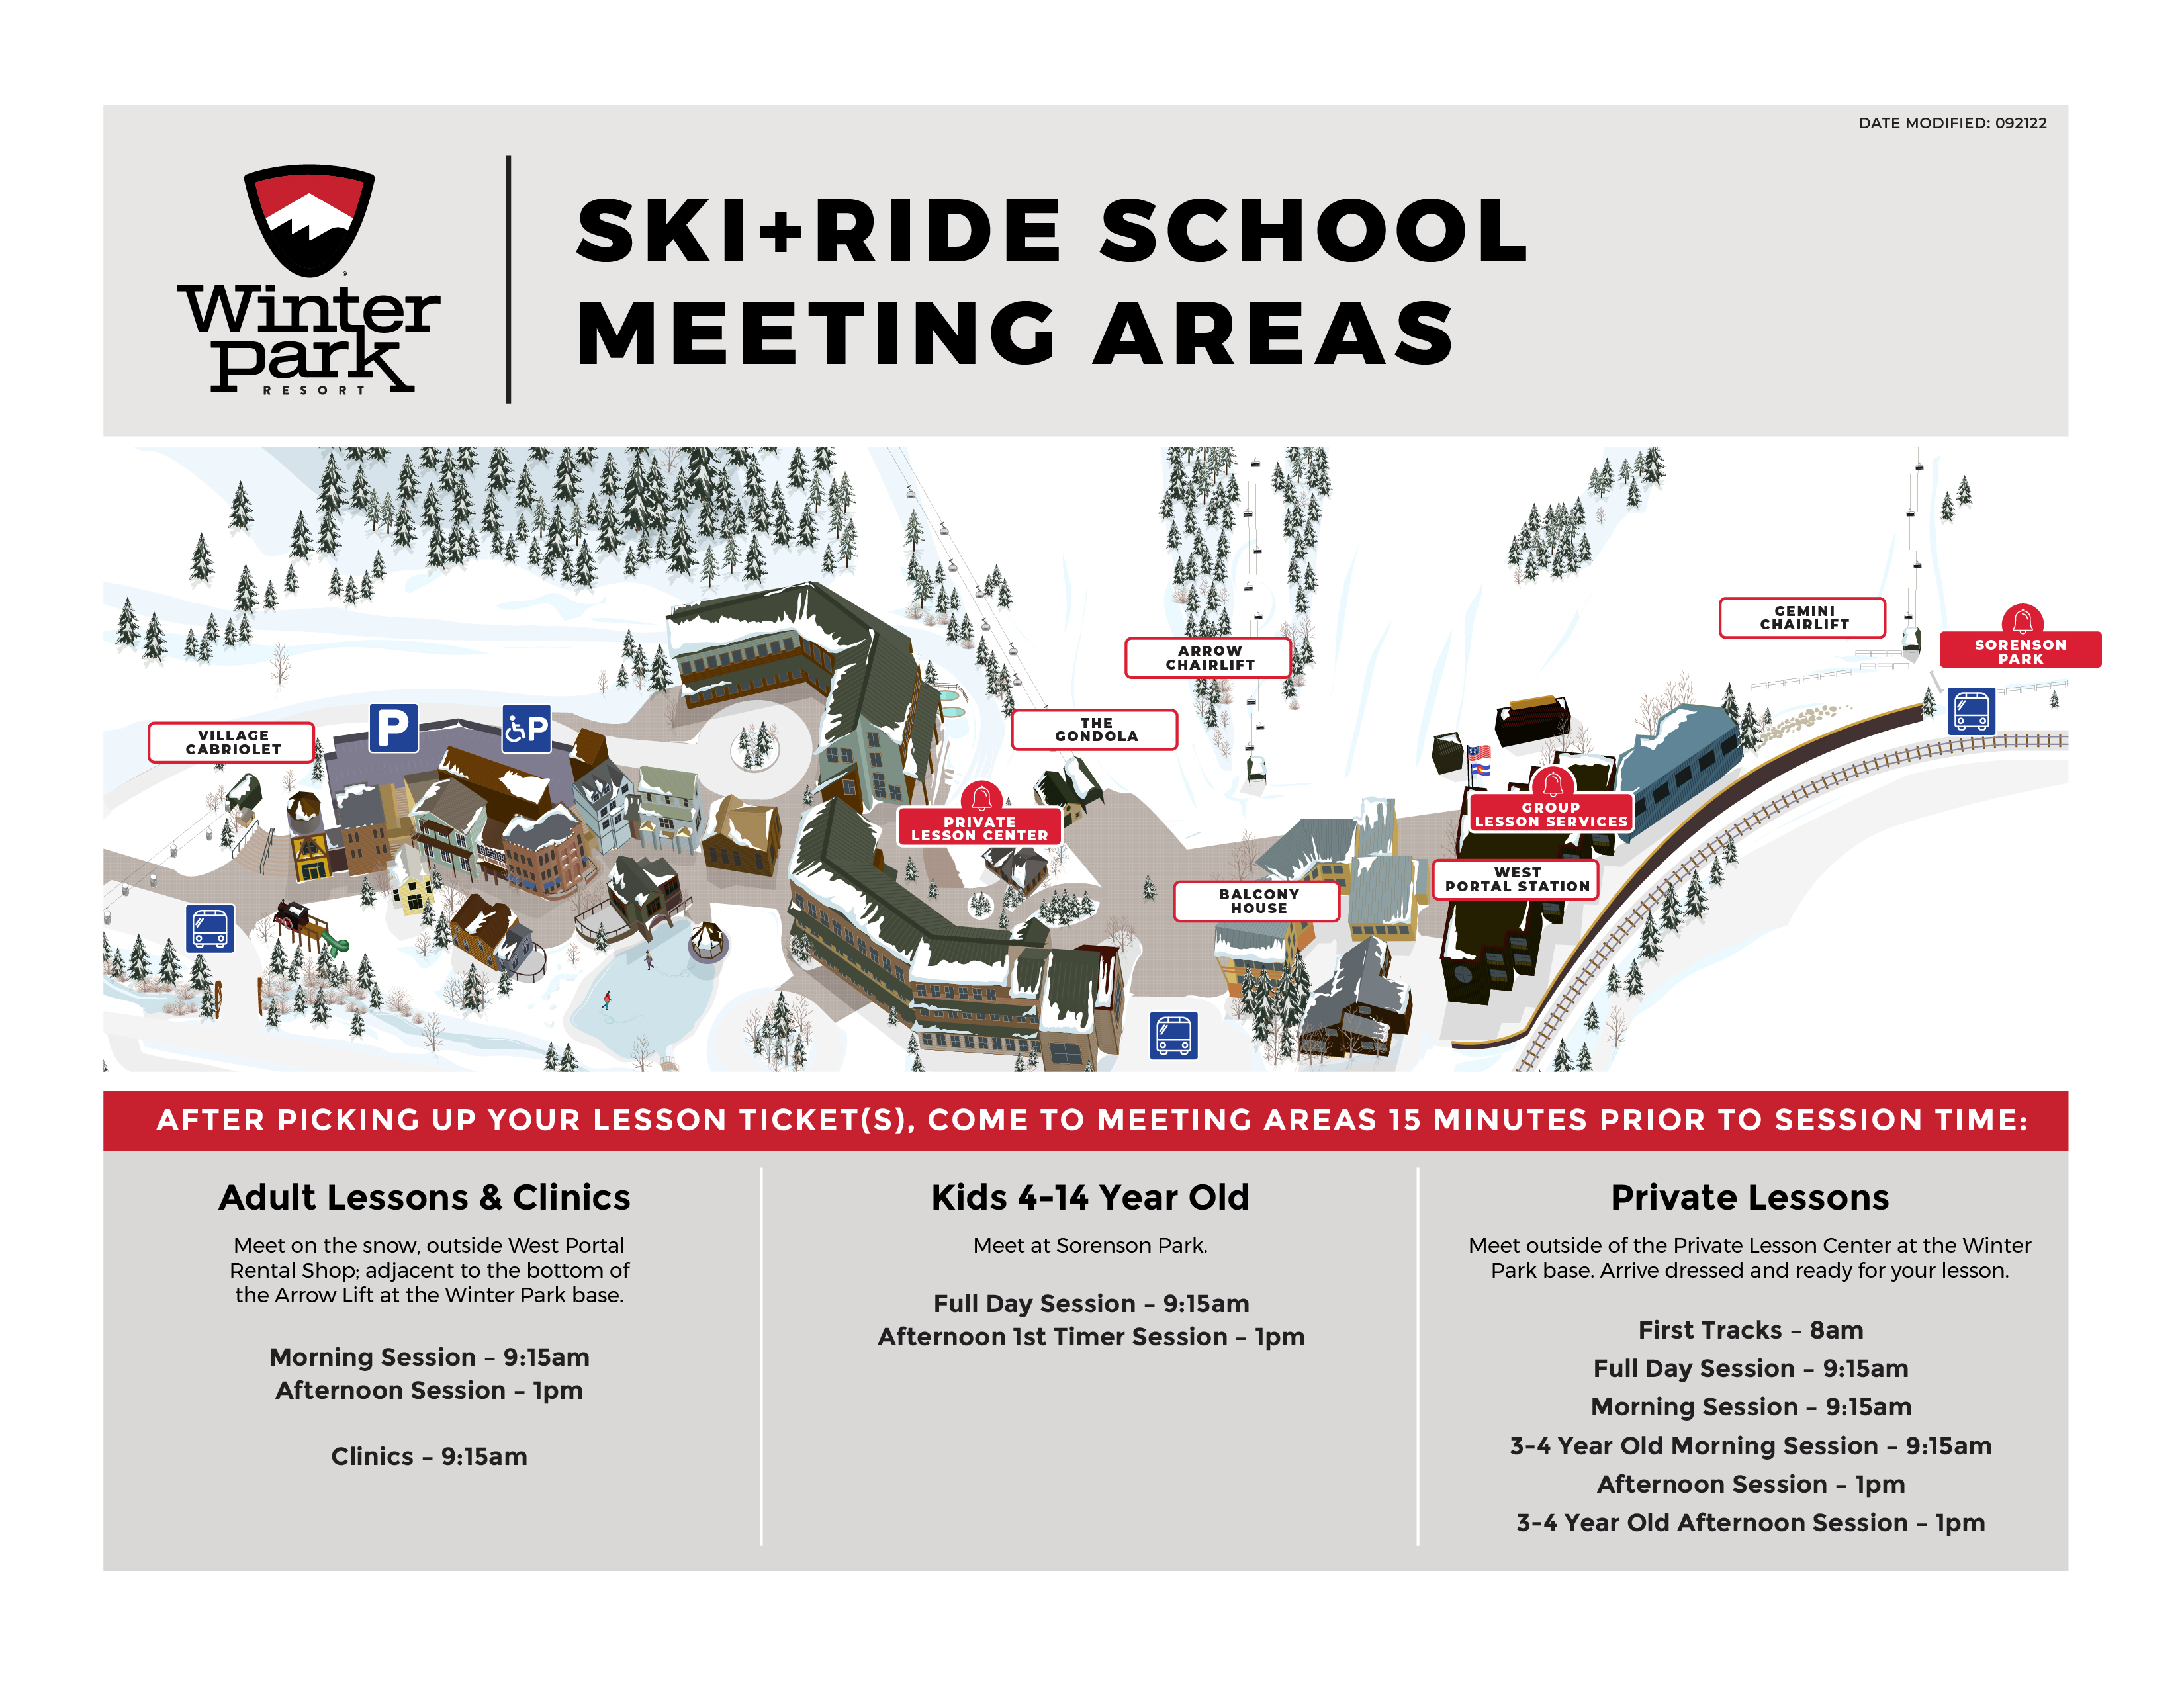 Ski and Ride School Meeting area map